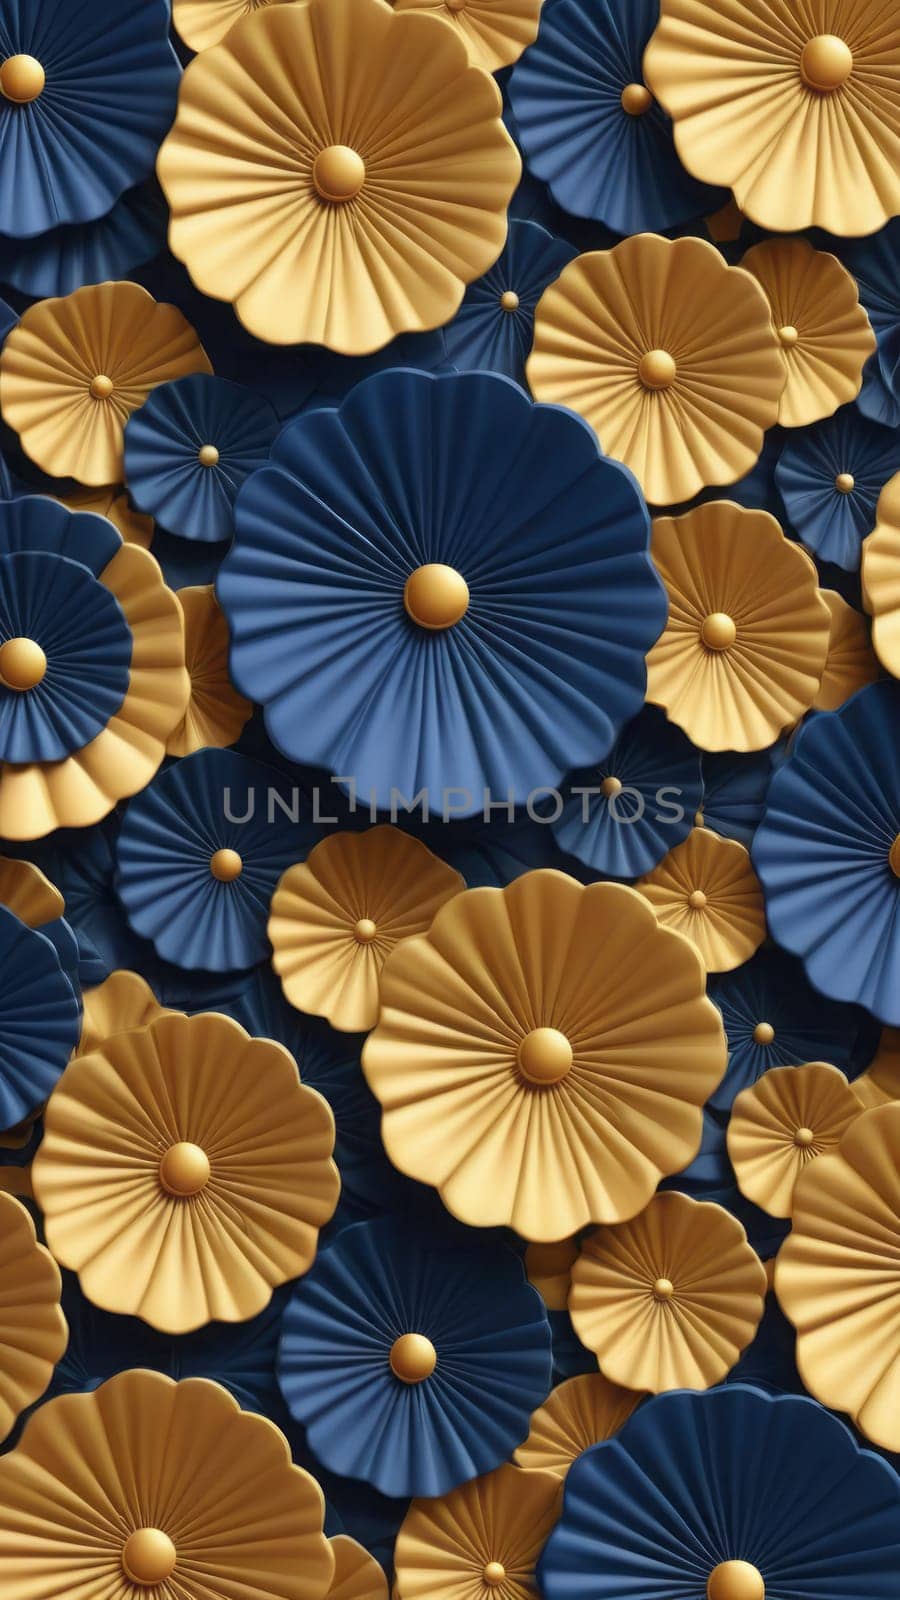 Art for inspiration from Rosette shapes and navy by nkotlyar